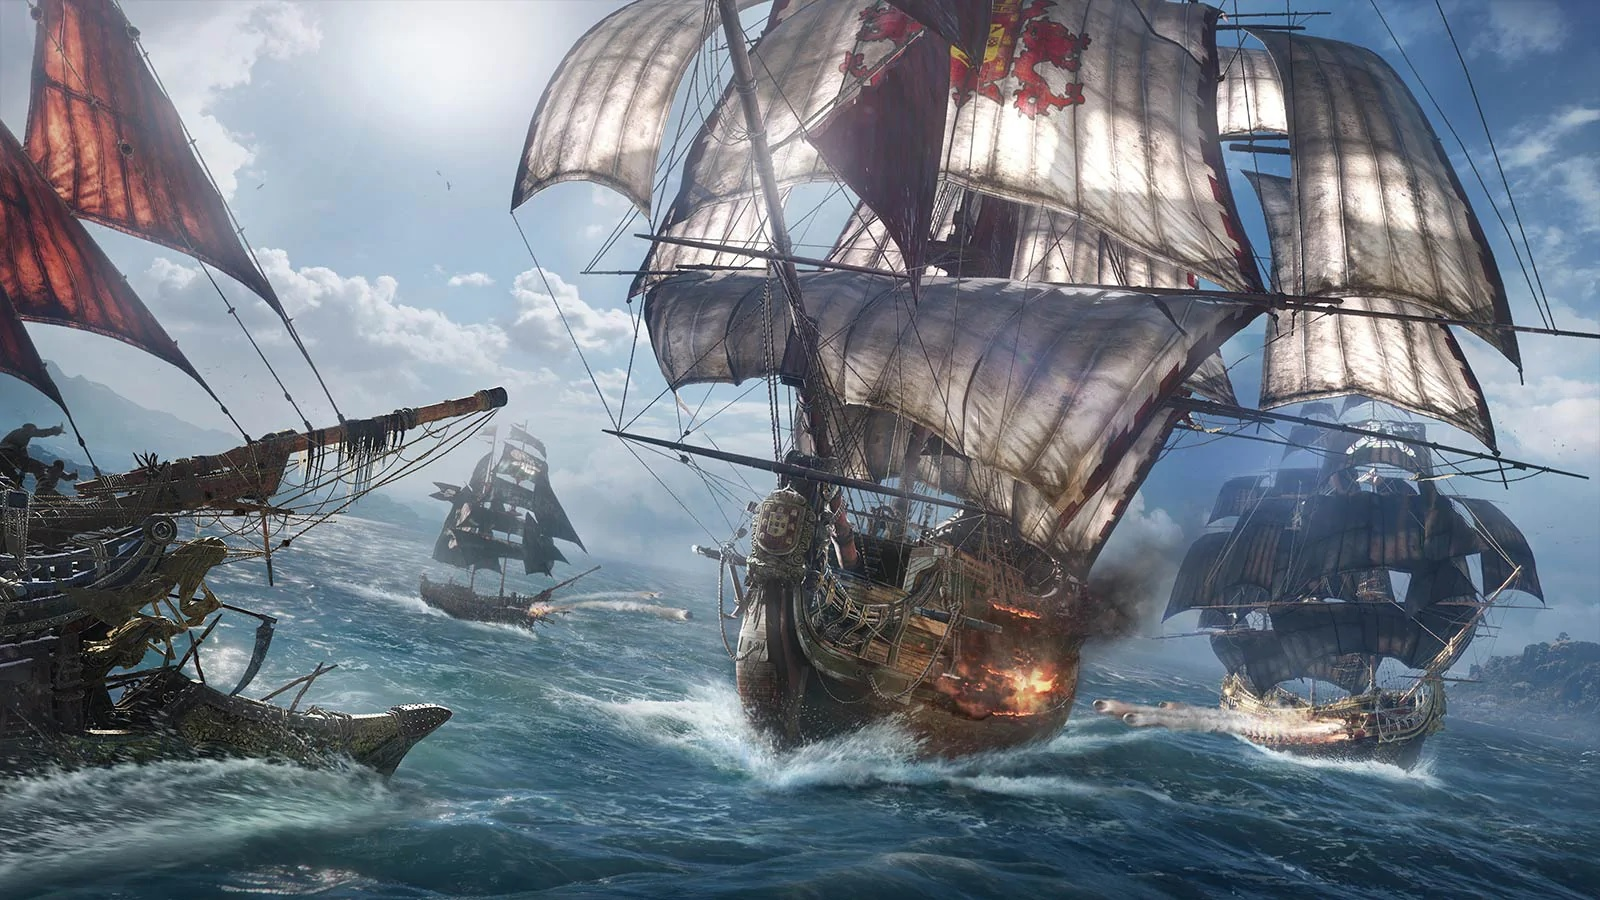 Skull & Bones' is the PvP pirate fighting game from Ubisoft you wanted